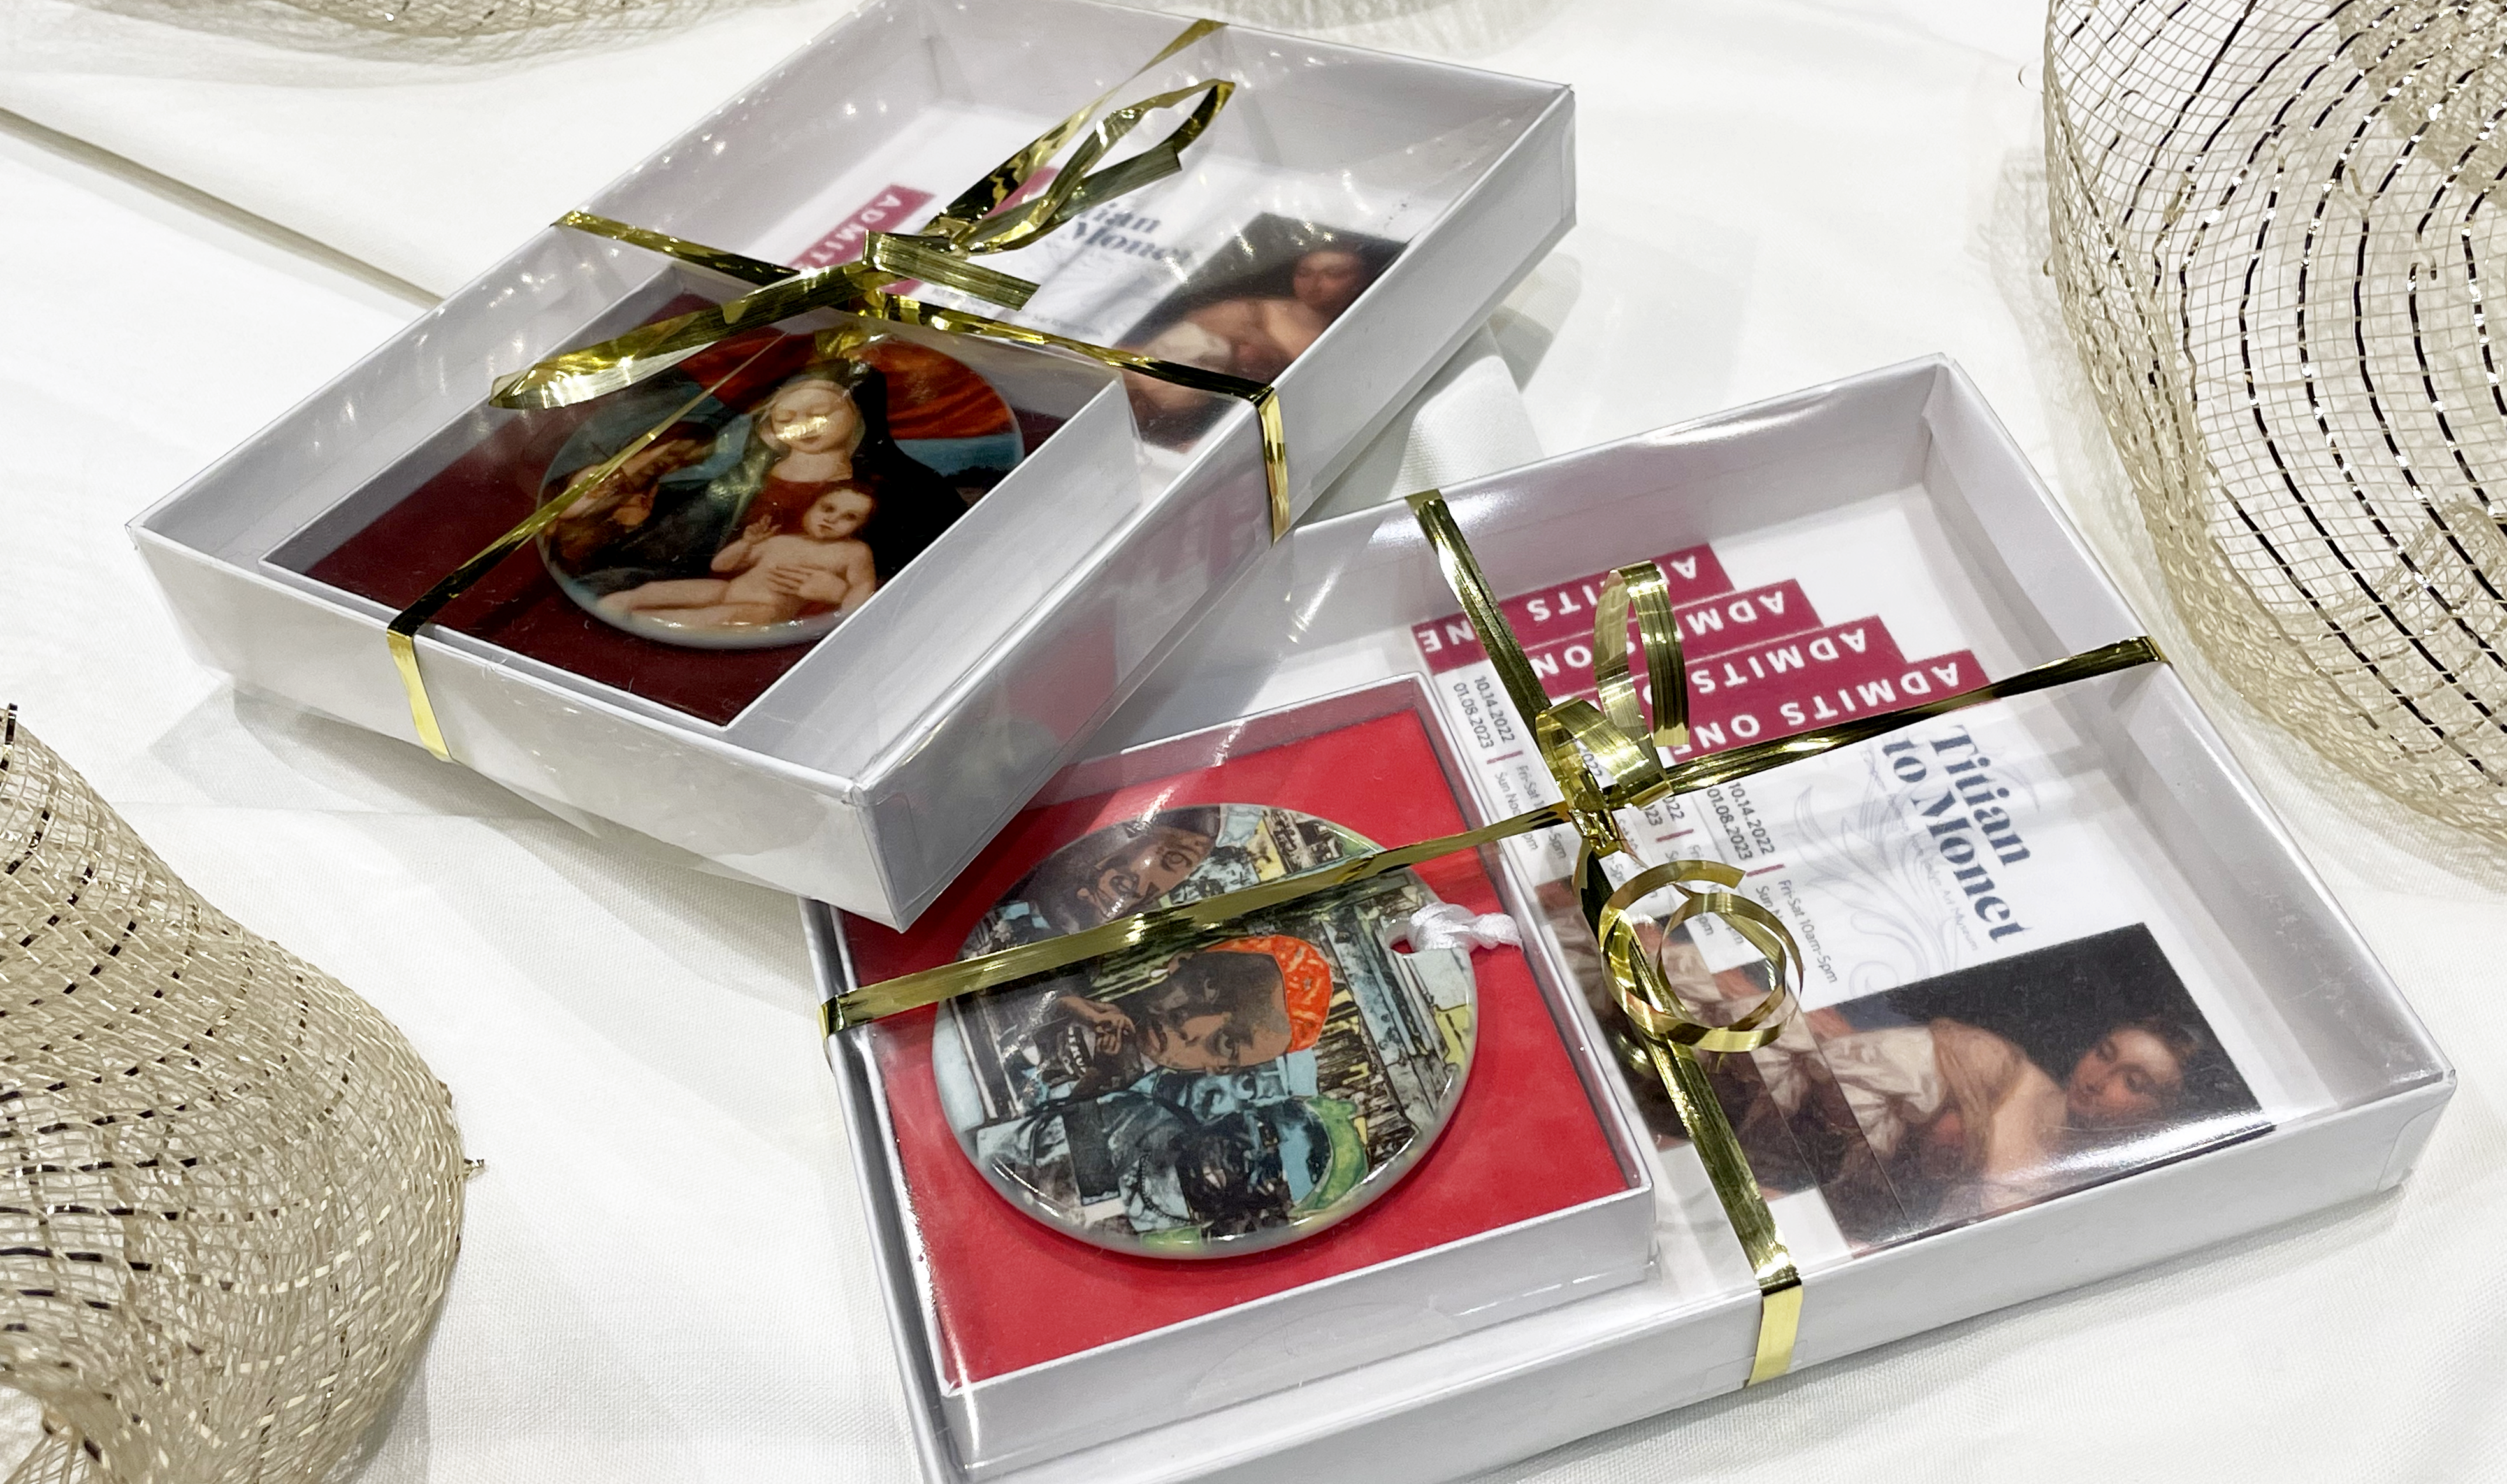 Boxed Gift: Porcelain Keepsake and Exhibition Tickets